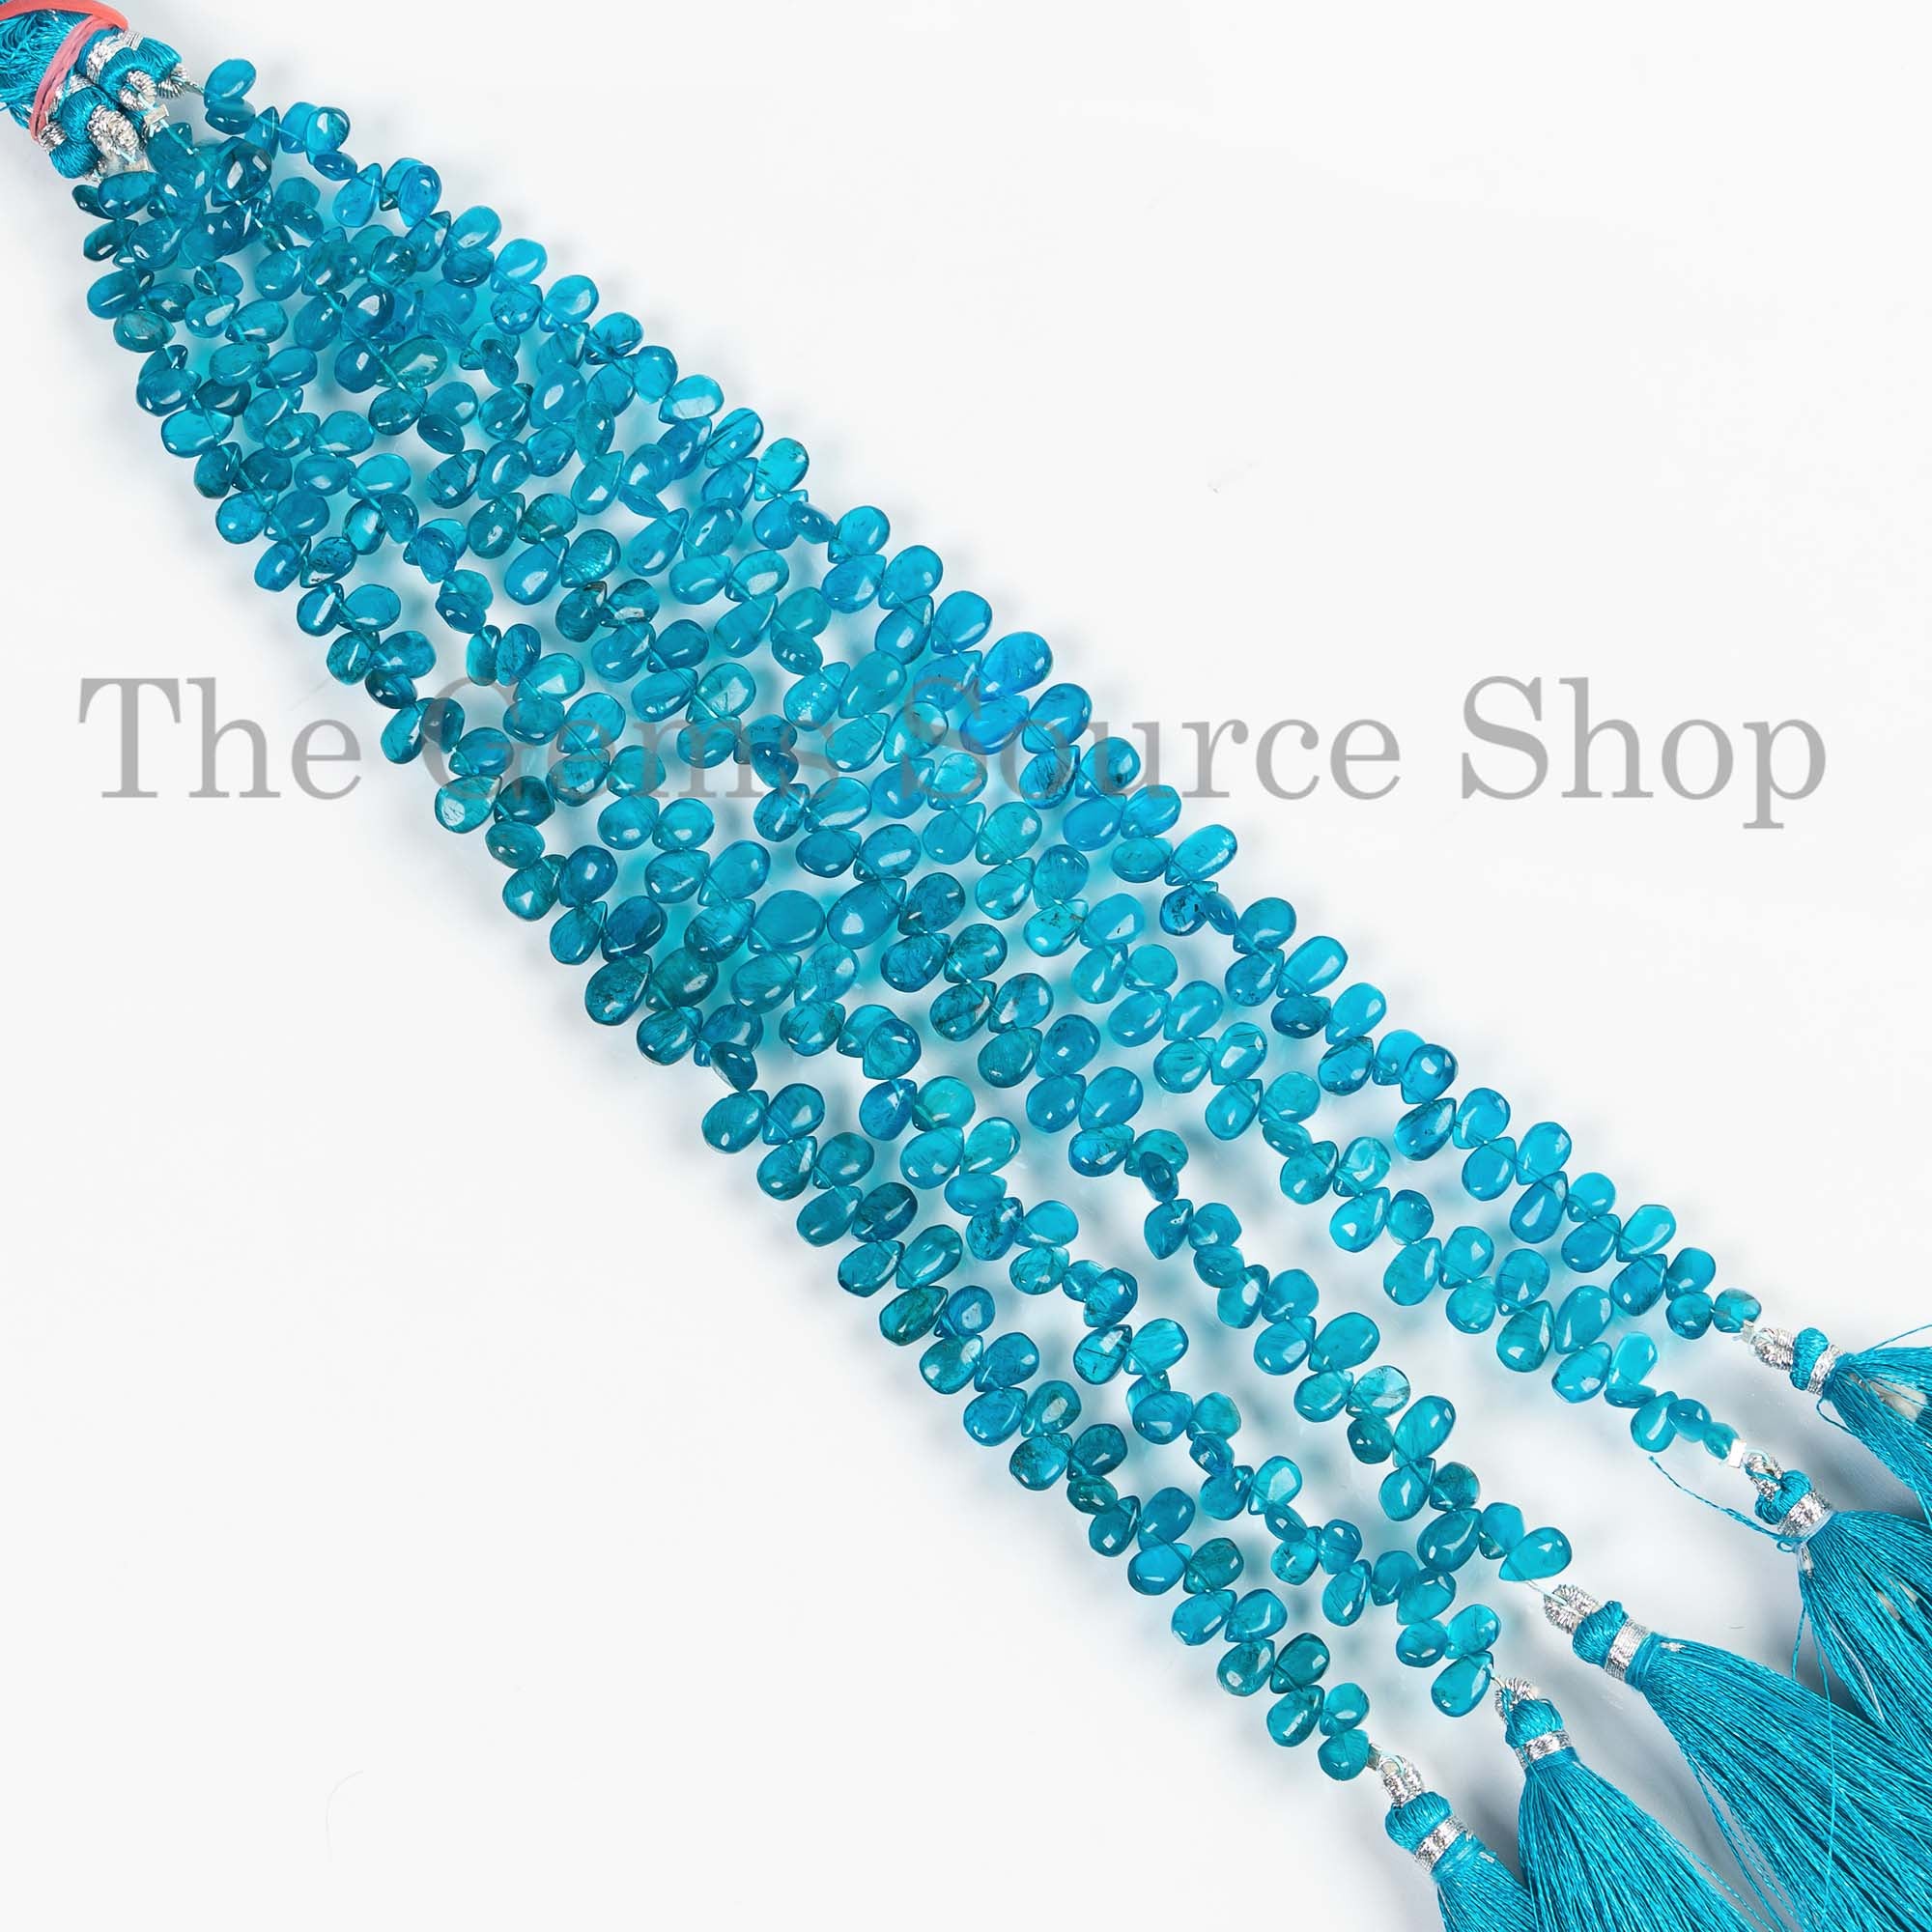 Top Quality Neon Apatite Pear Briolette, 4x6.5-5.5x9mm Neon Apatite Beads, Smooth Beads, Pear Beads, Apatite Drop Beads, Beads Jewelry